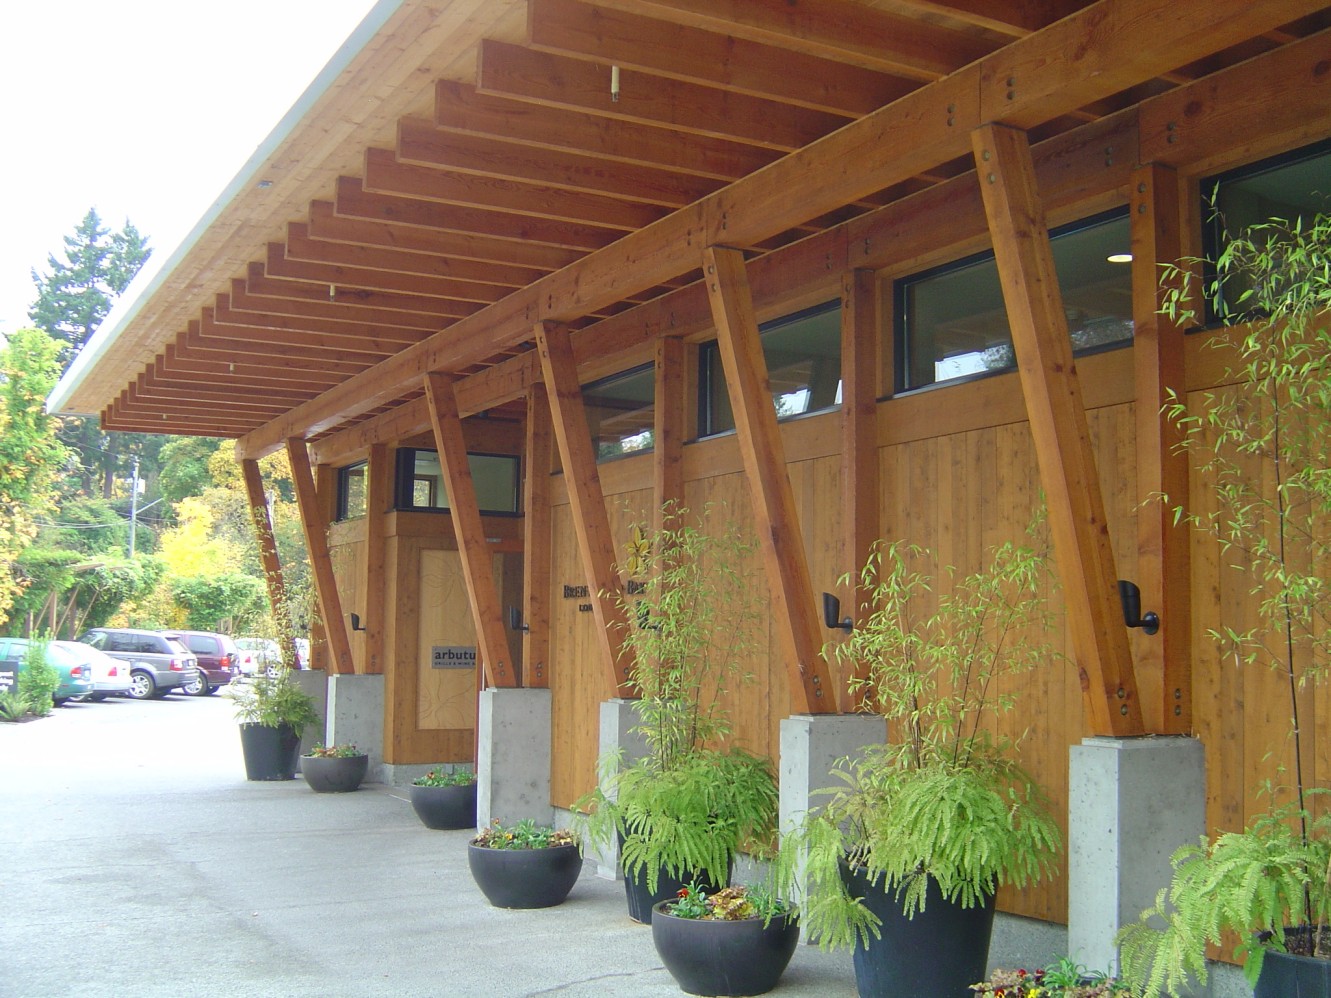 Glulam structure in British Colombia